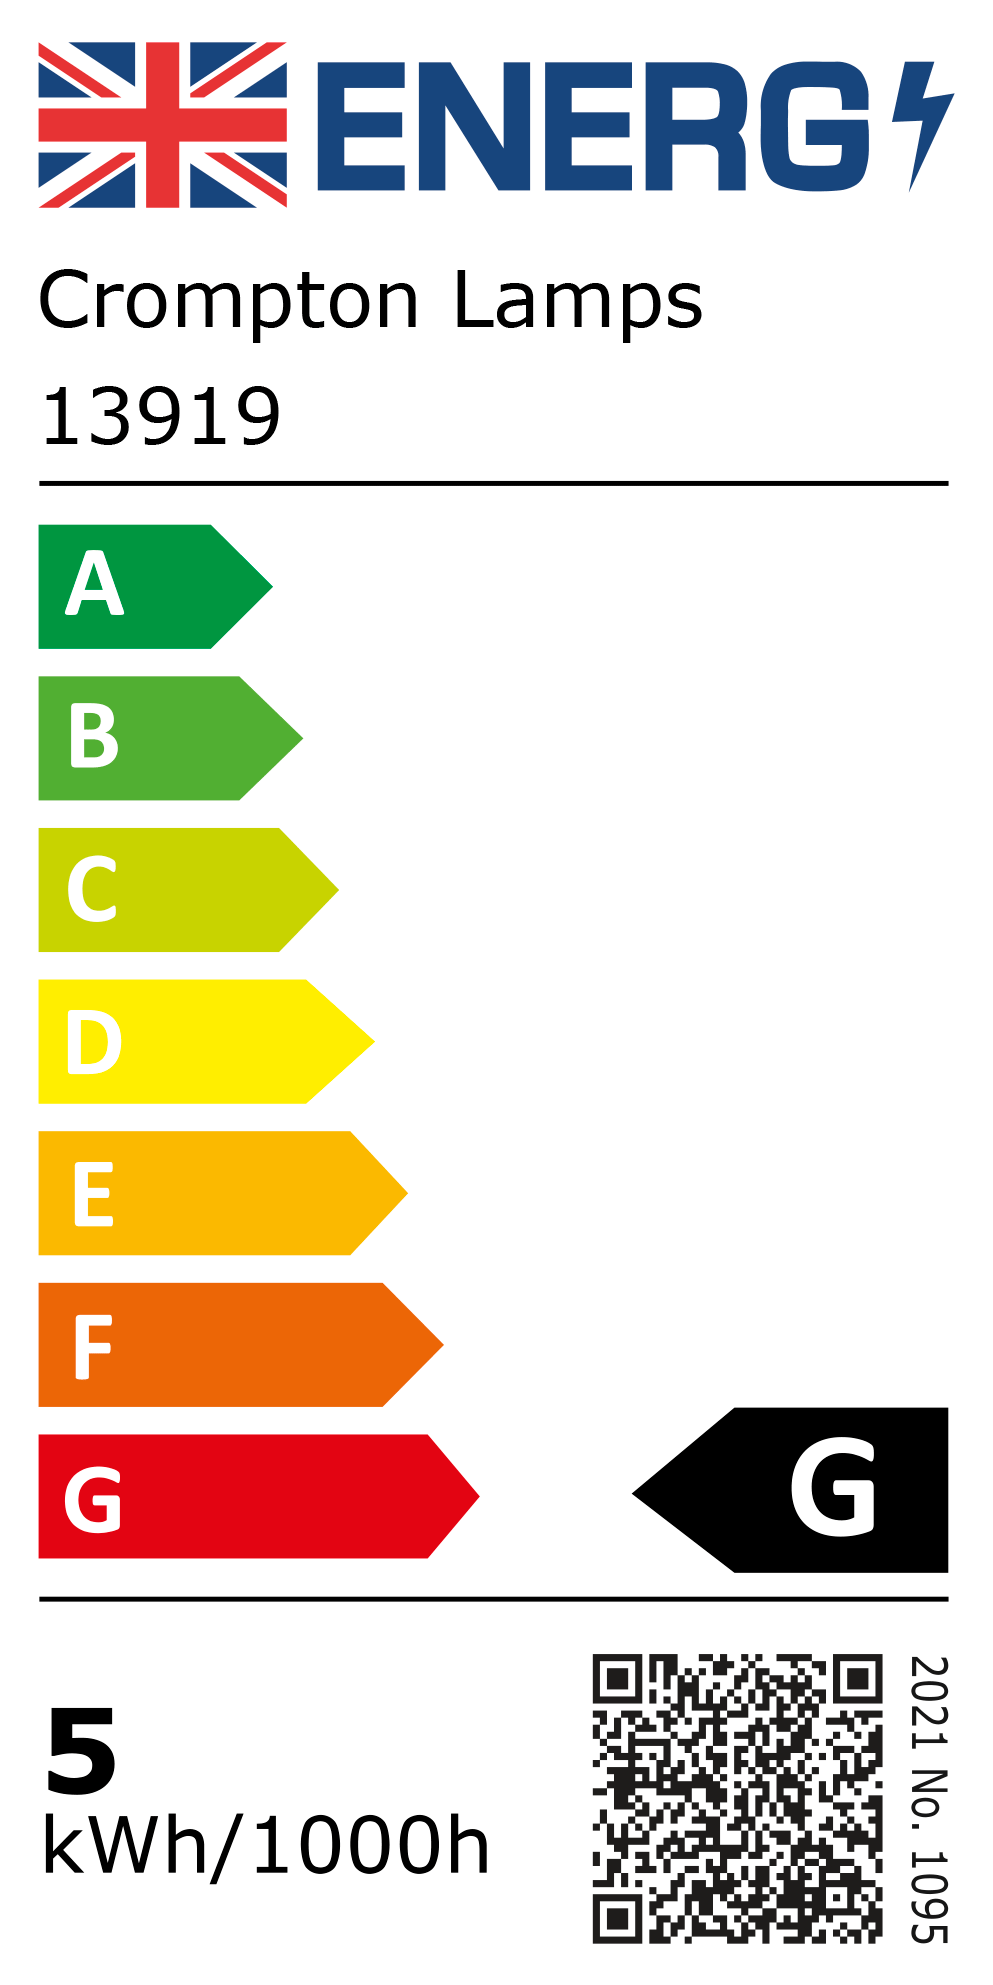 New 2021 Energy Rating Label: Stock Code 13919